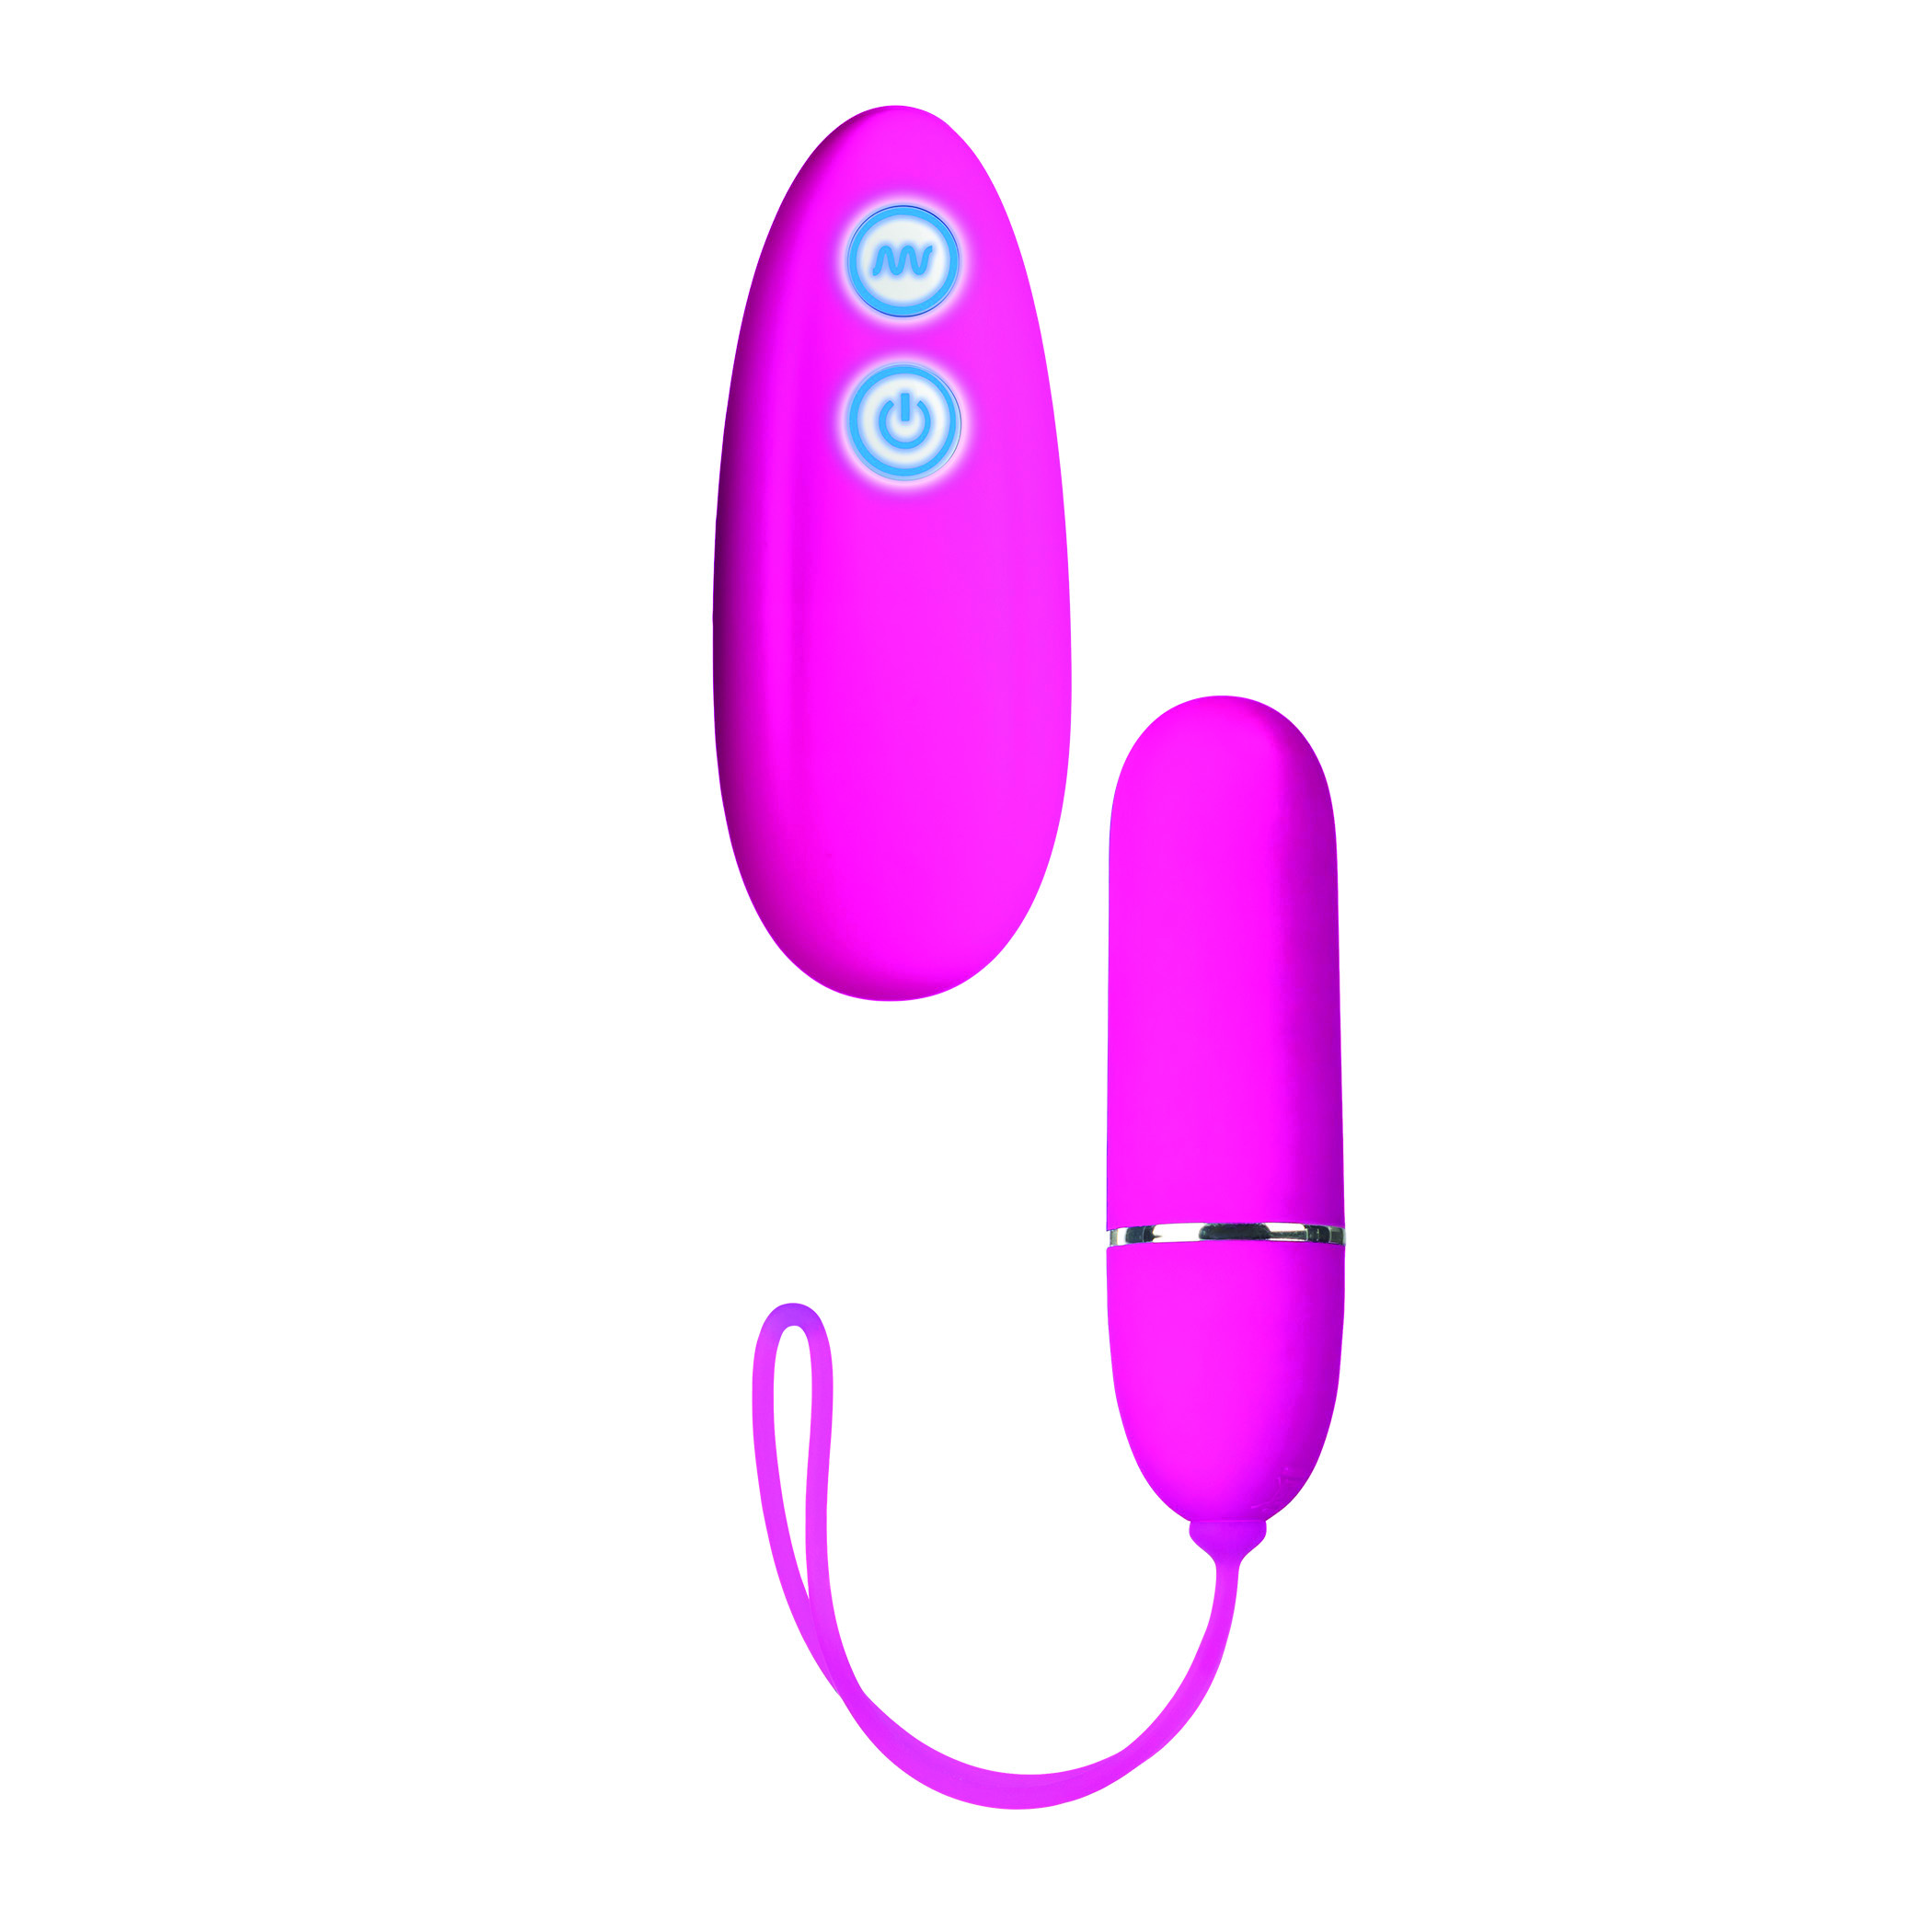 POSH 7 FUNCTION LOVERS REMOTE PINK 